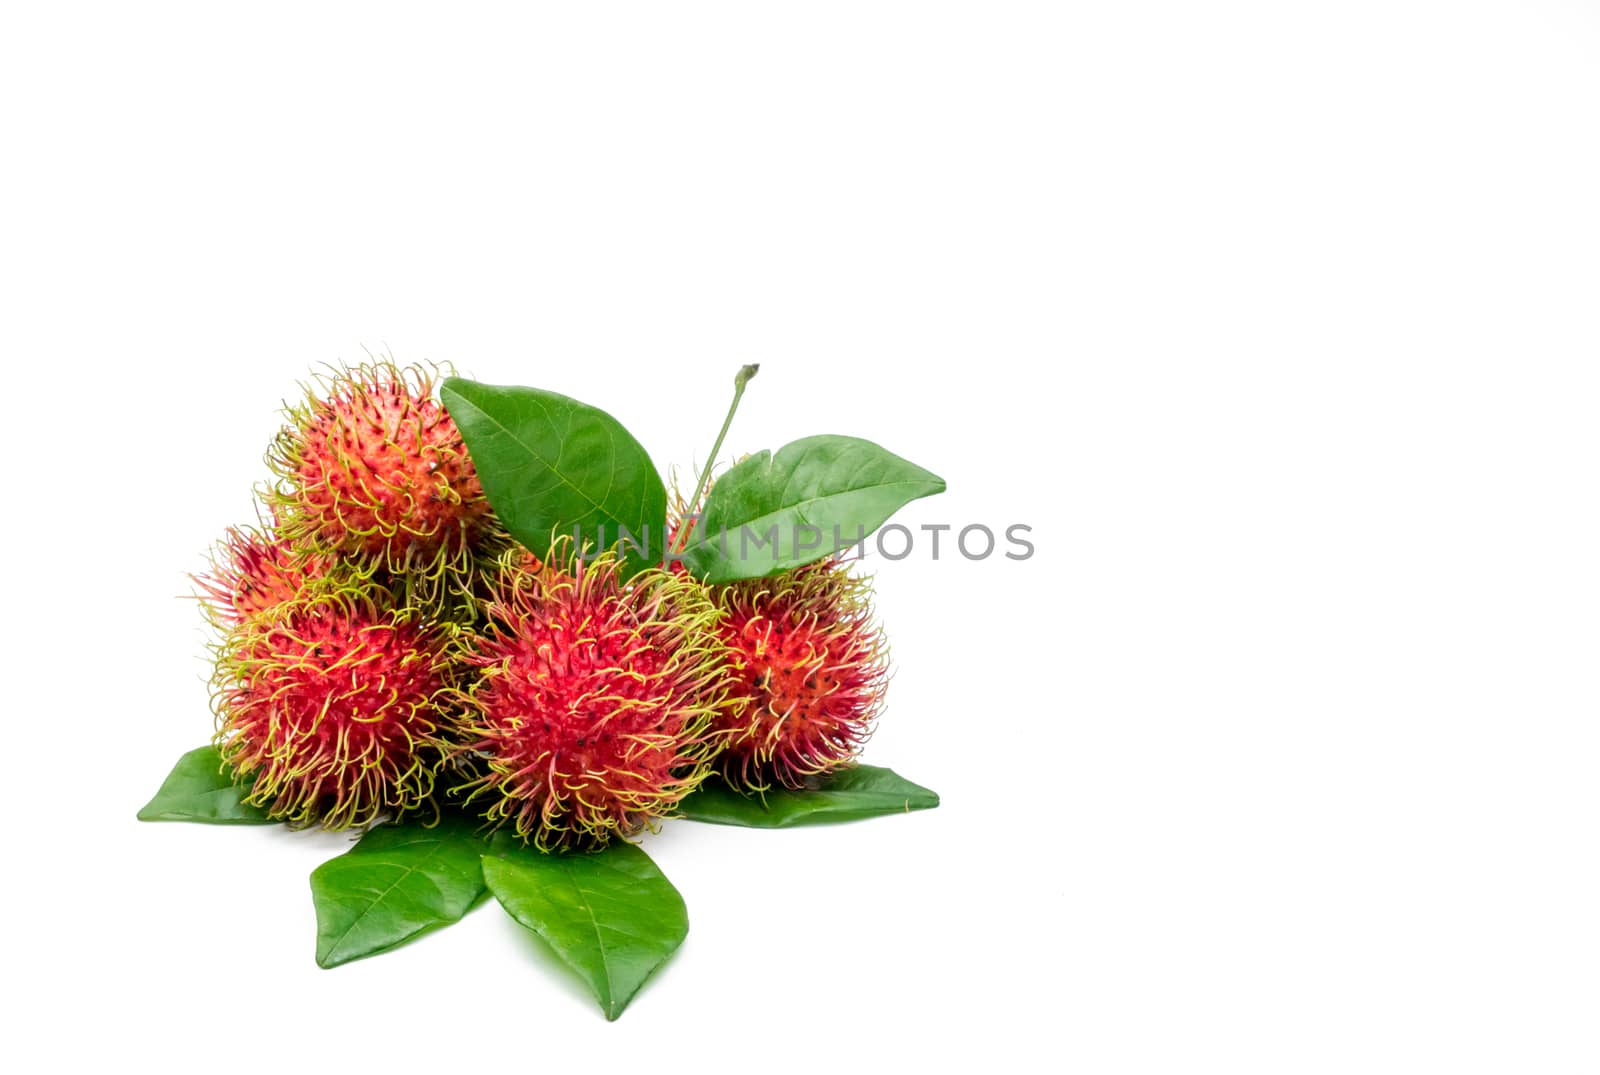 Fresh red ripe rambutan (Nephelium lappaceum) with leaves isolated on white background. Thai dessert sweet fruits. by Fahroni